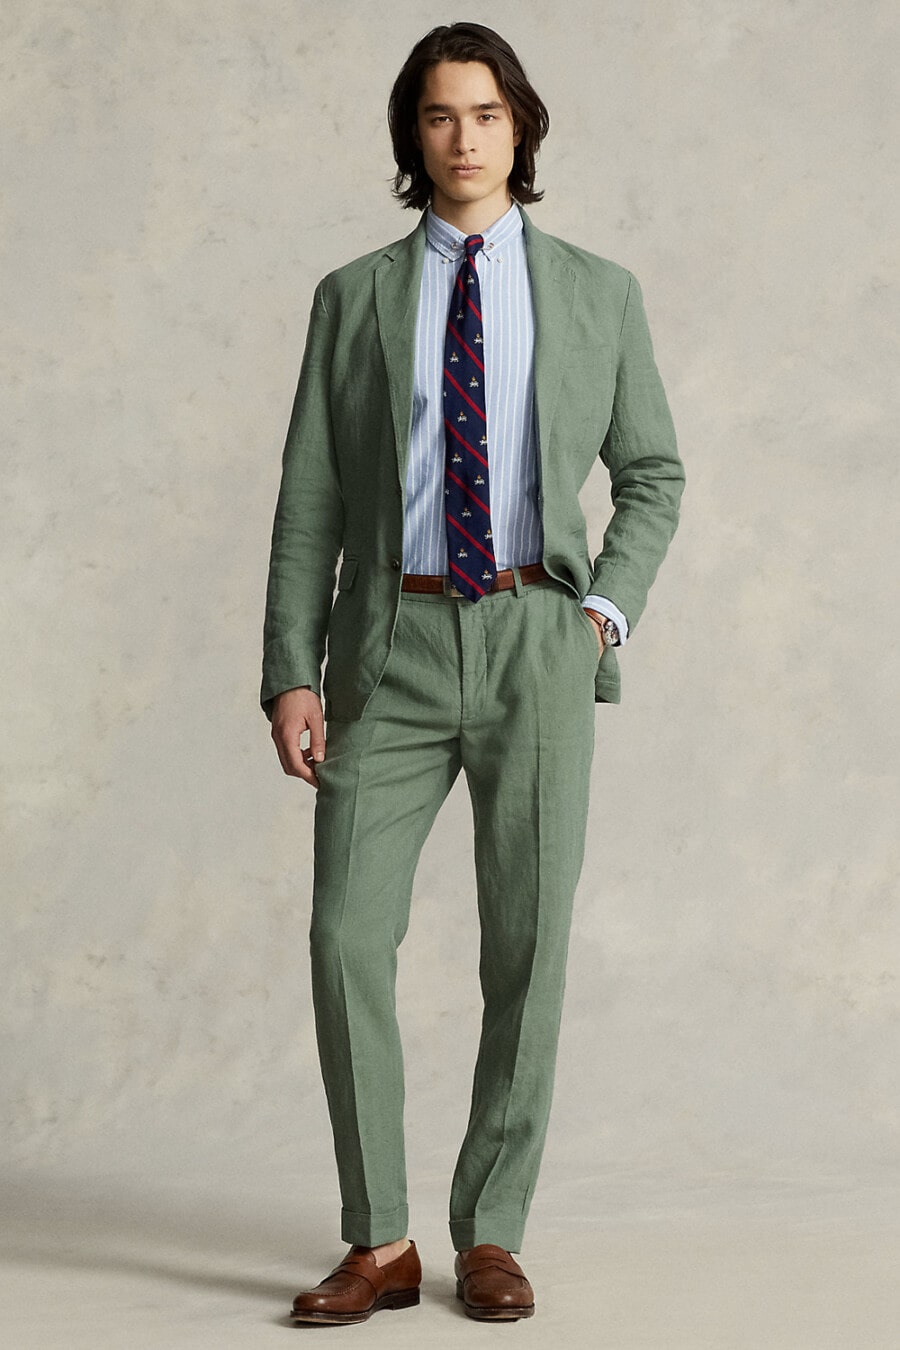 Men's green suit, blue/white stripe shirt, navy/red club repp tie and brown leather penny loafers outfit